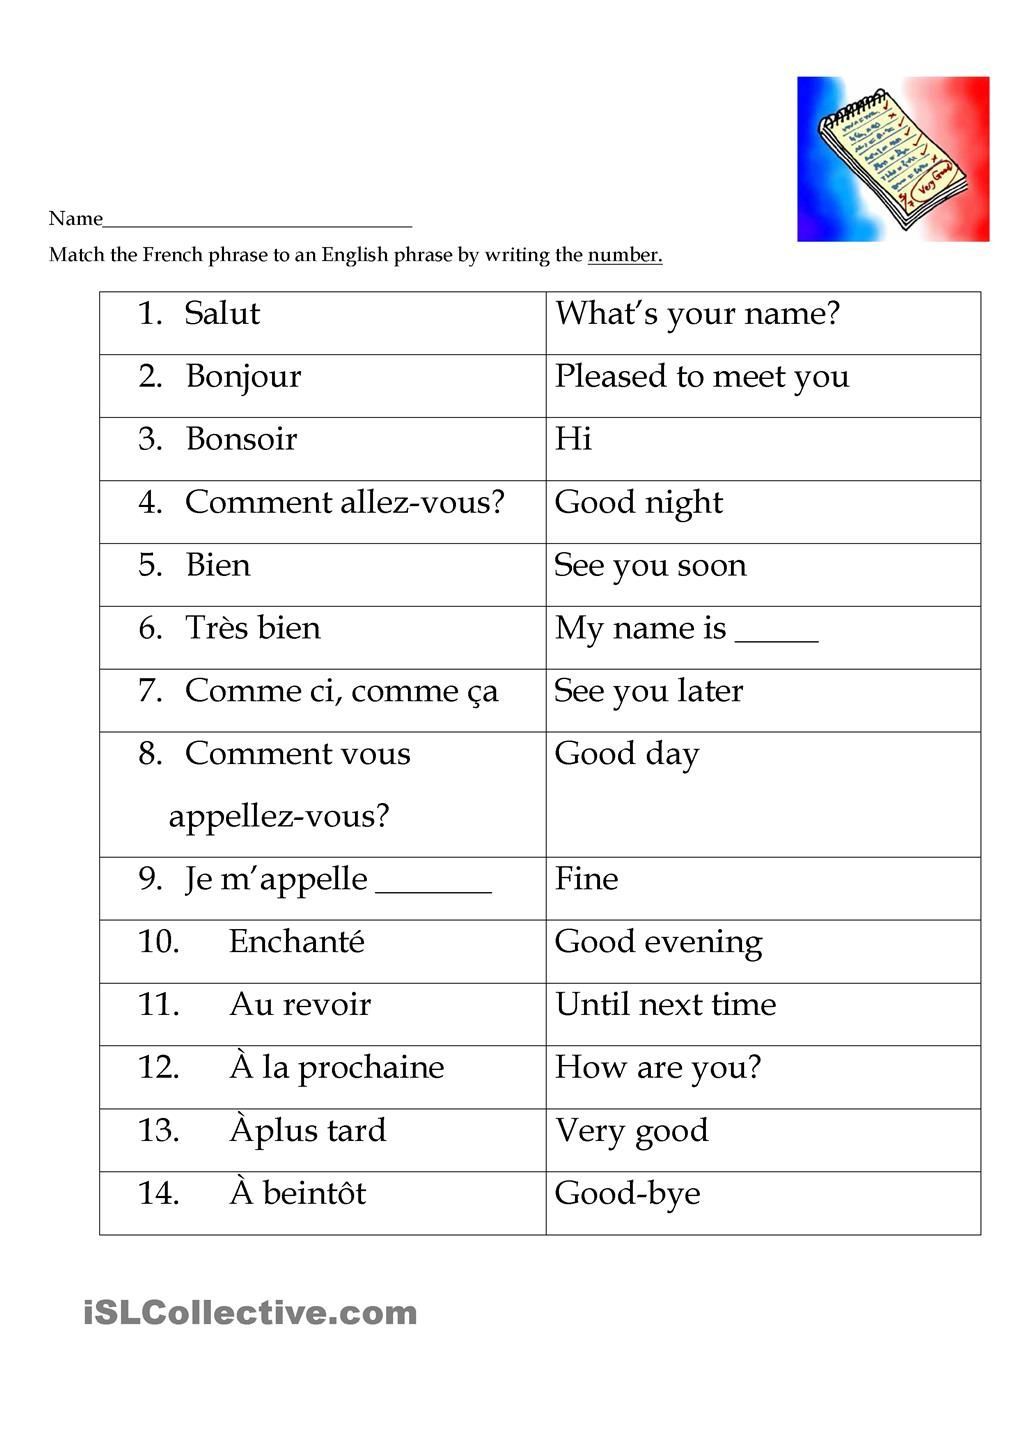 French Greetings Match | School Stuffs 15 | French Worksheets | Printable French Worksheets For High School